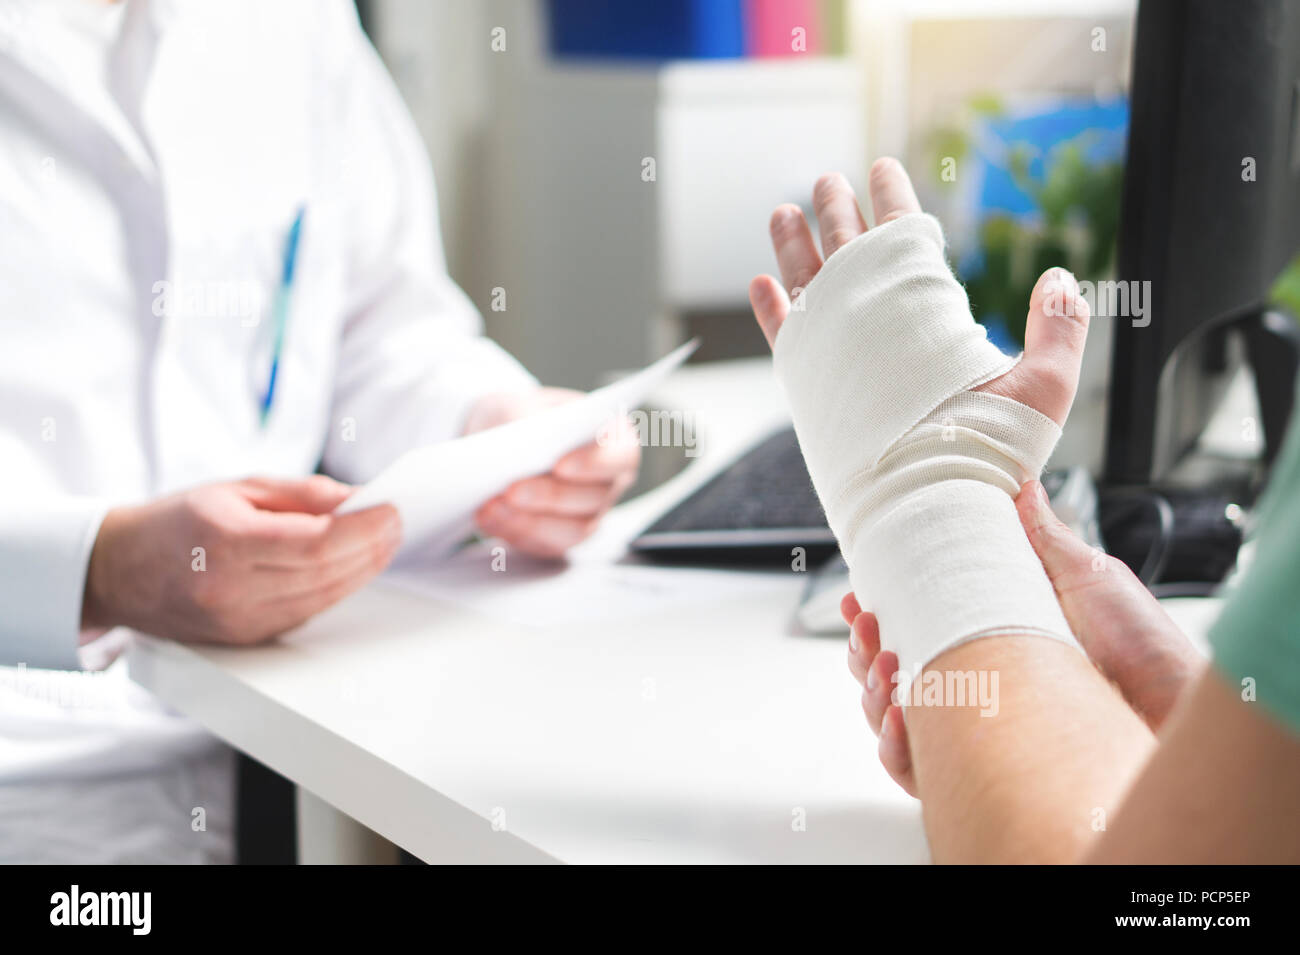 Injured patient showing doctor broken wrist and arm with bandage in hospital office or emergency room. Sprain, stress fracture or repetitive strain. Stock Photo